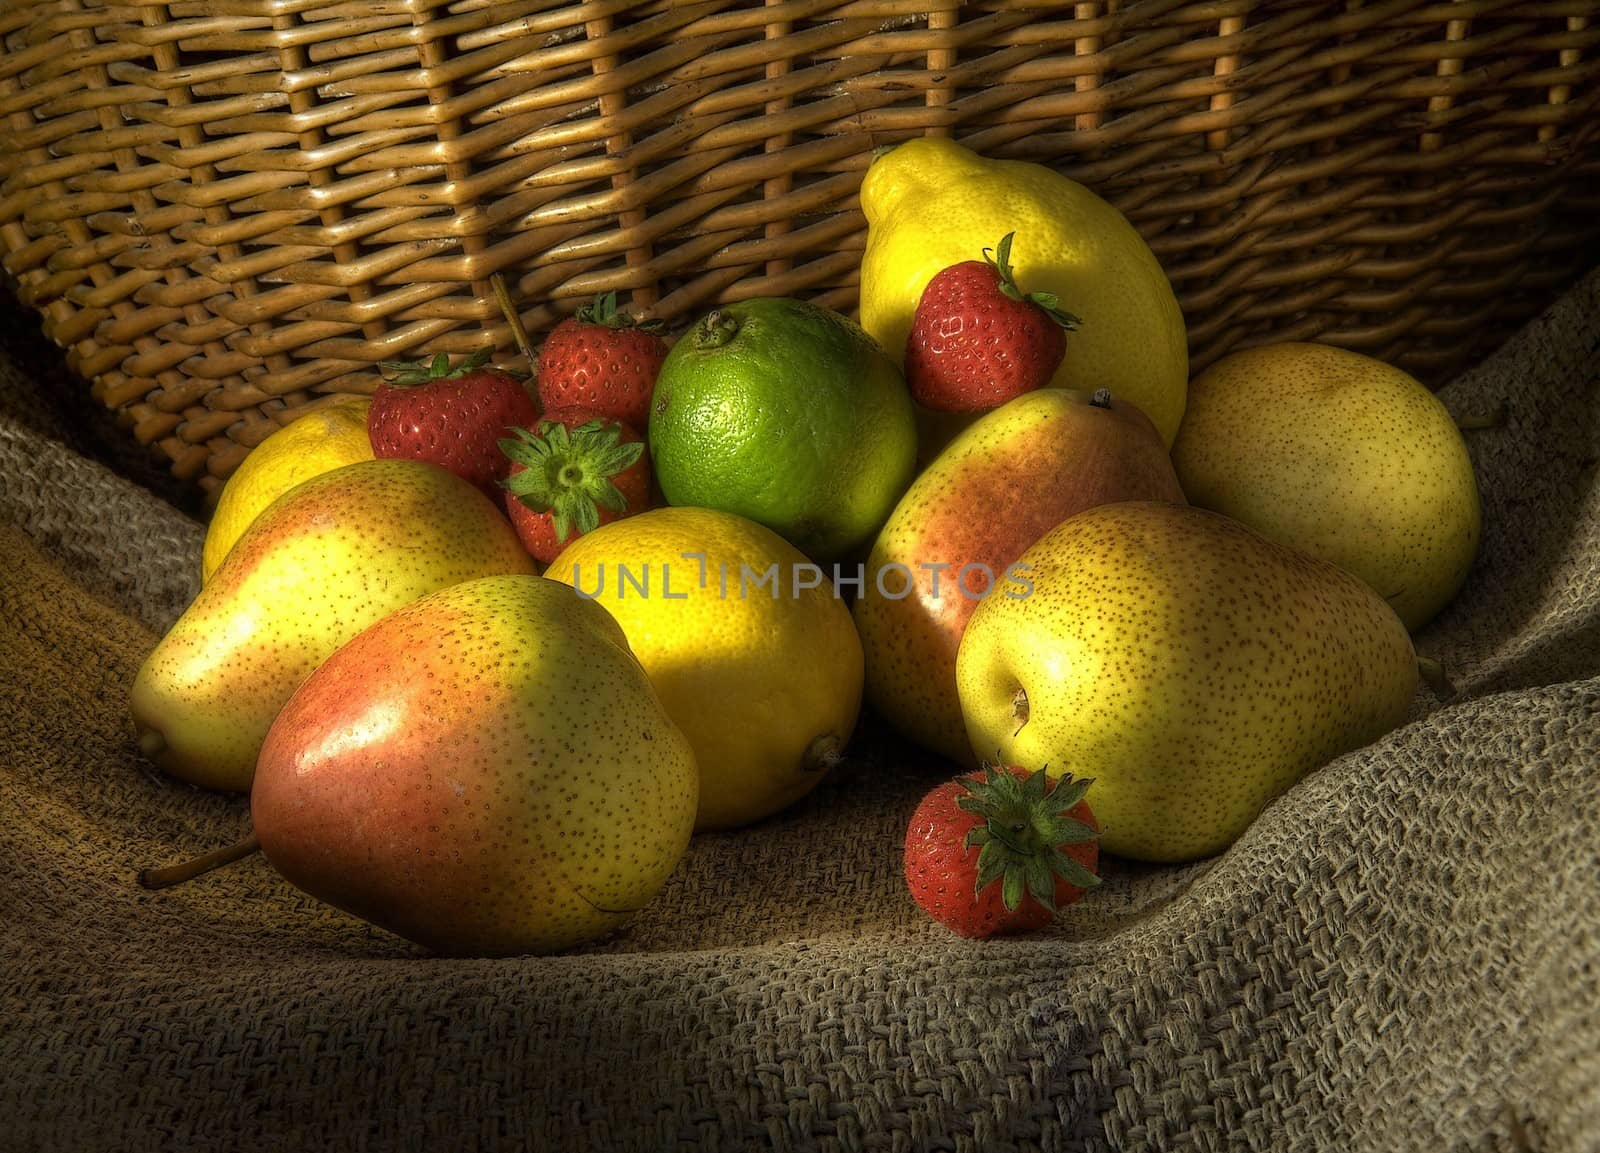 Pears, Lemons and Strawberries by andrewroland